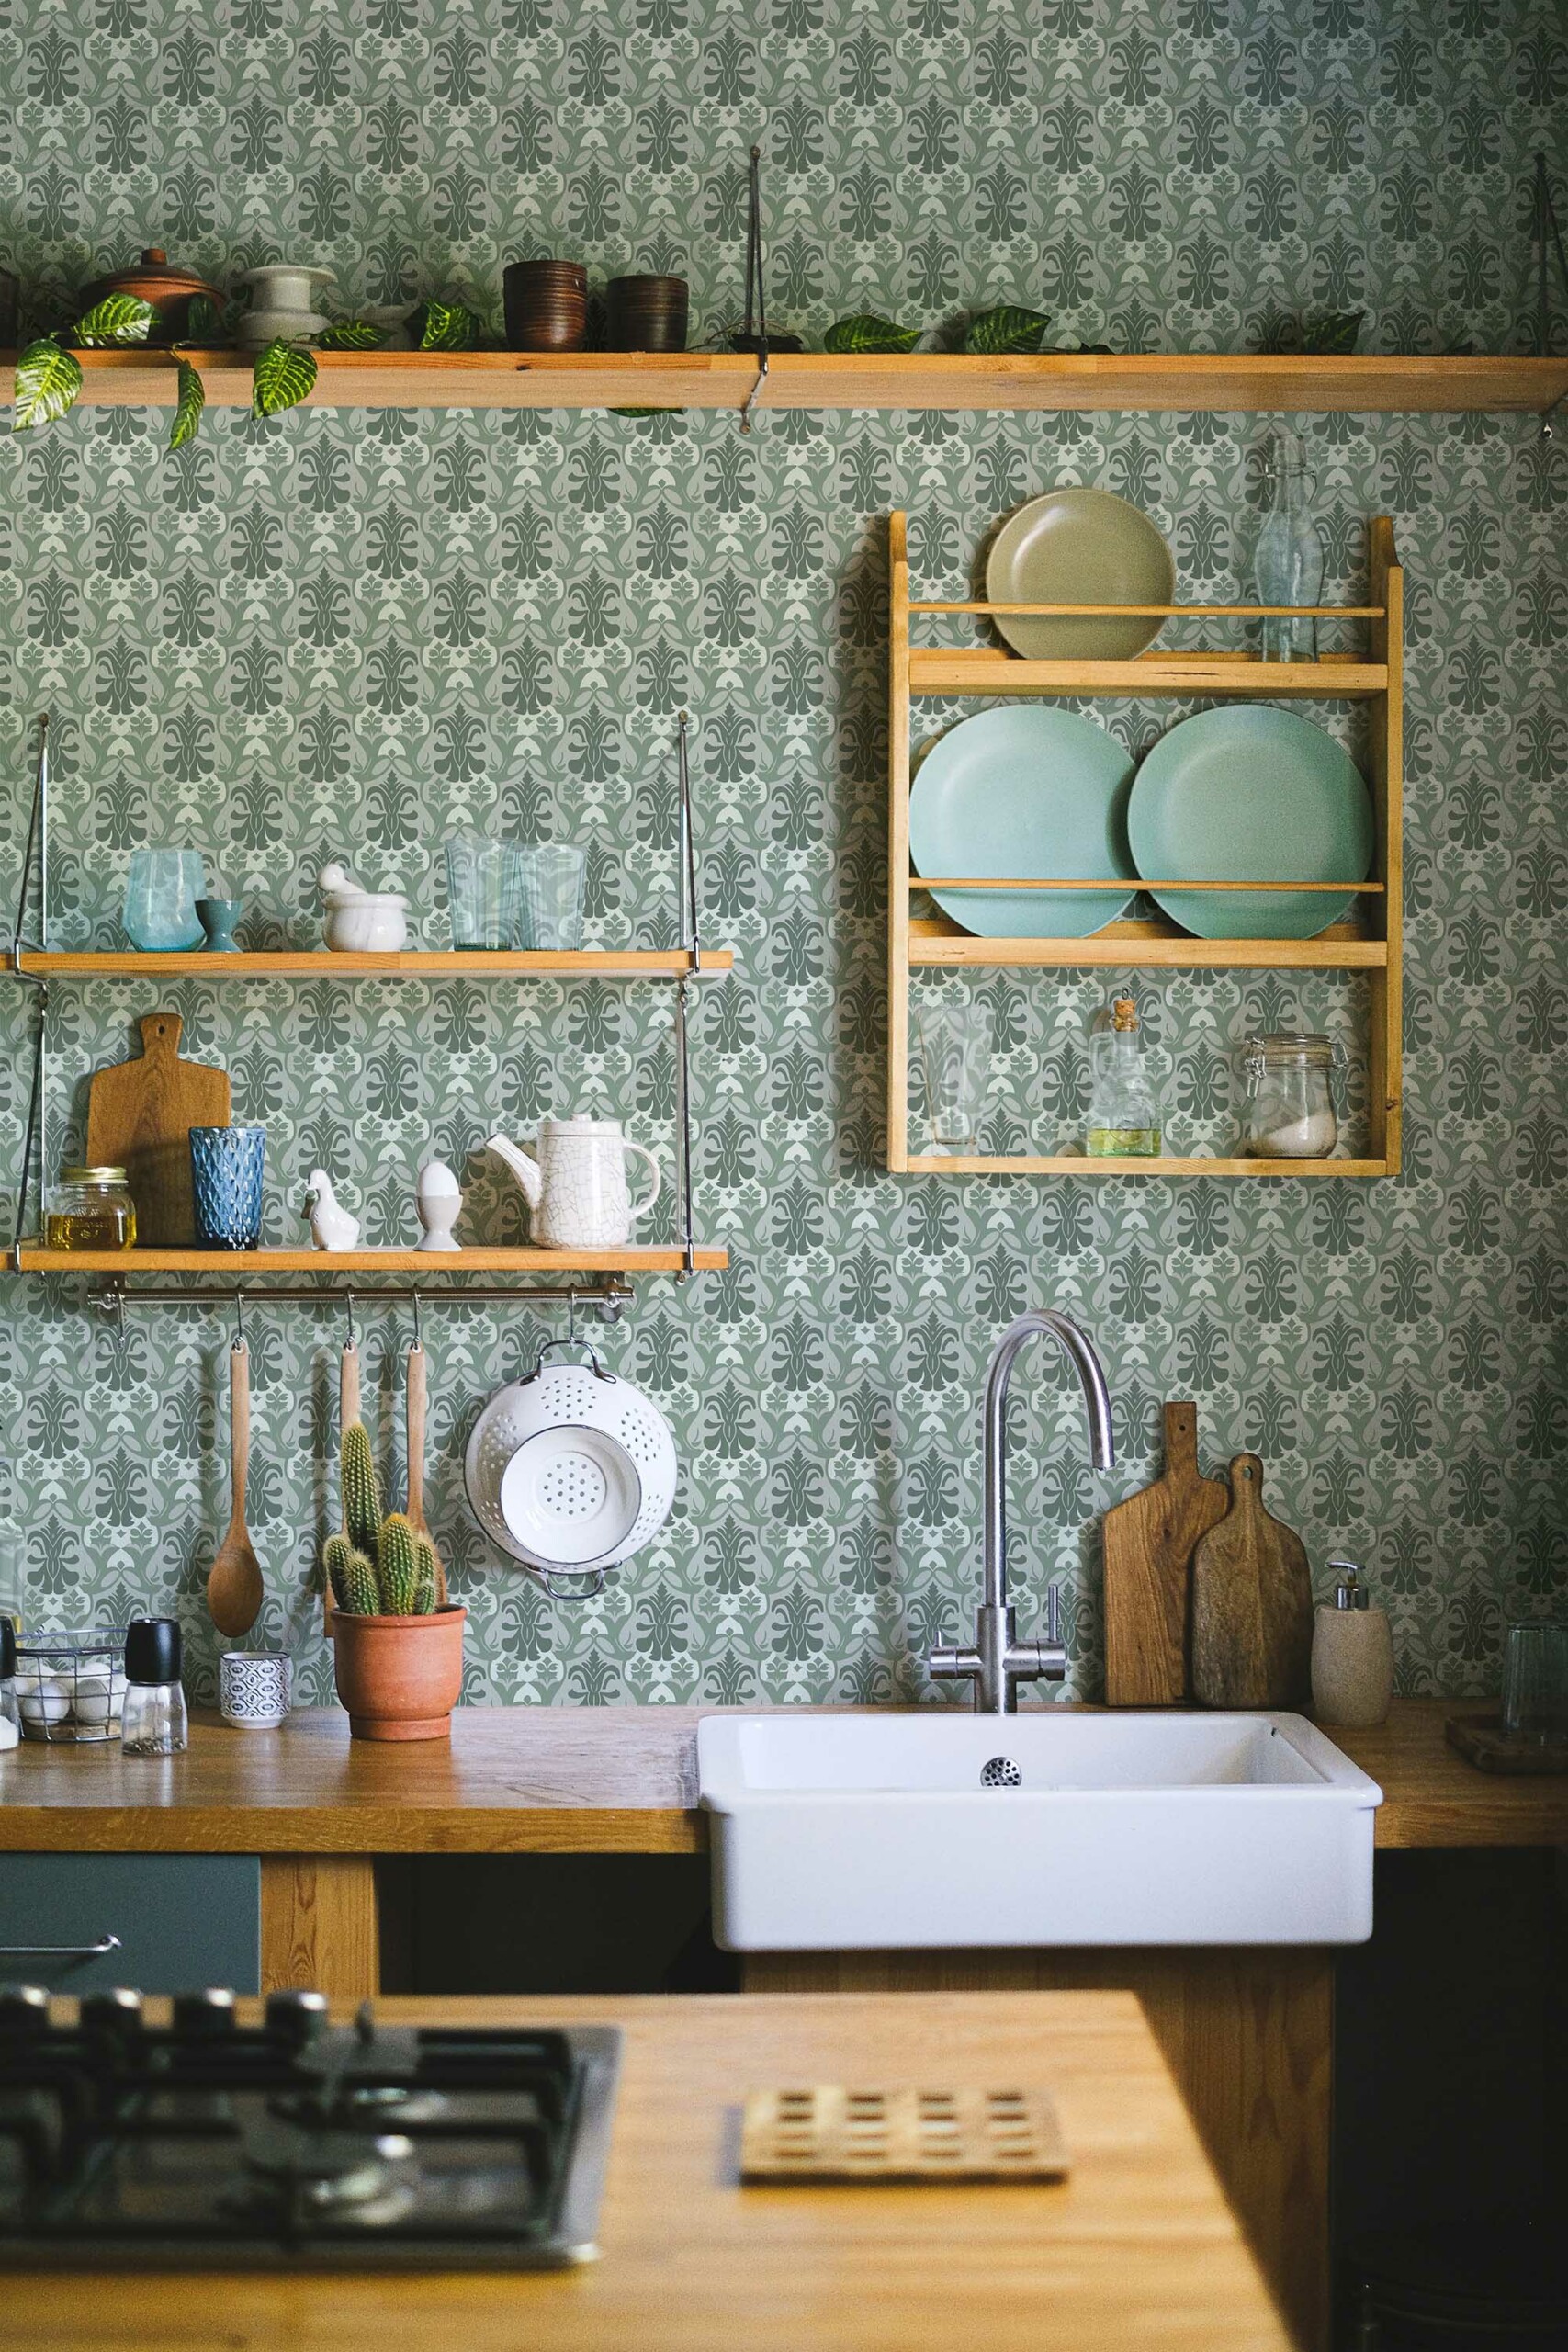 Vintage Green Kitchen Wallpaper - Peel and Stick or Non-Pasted